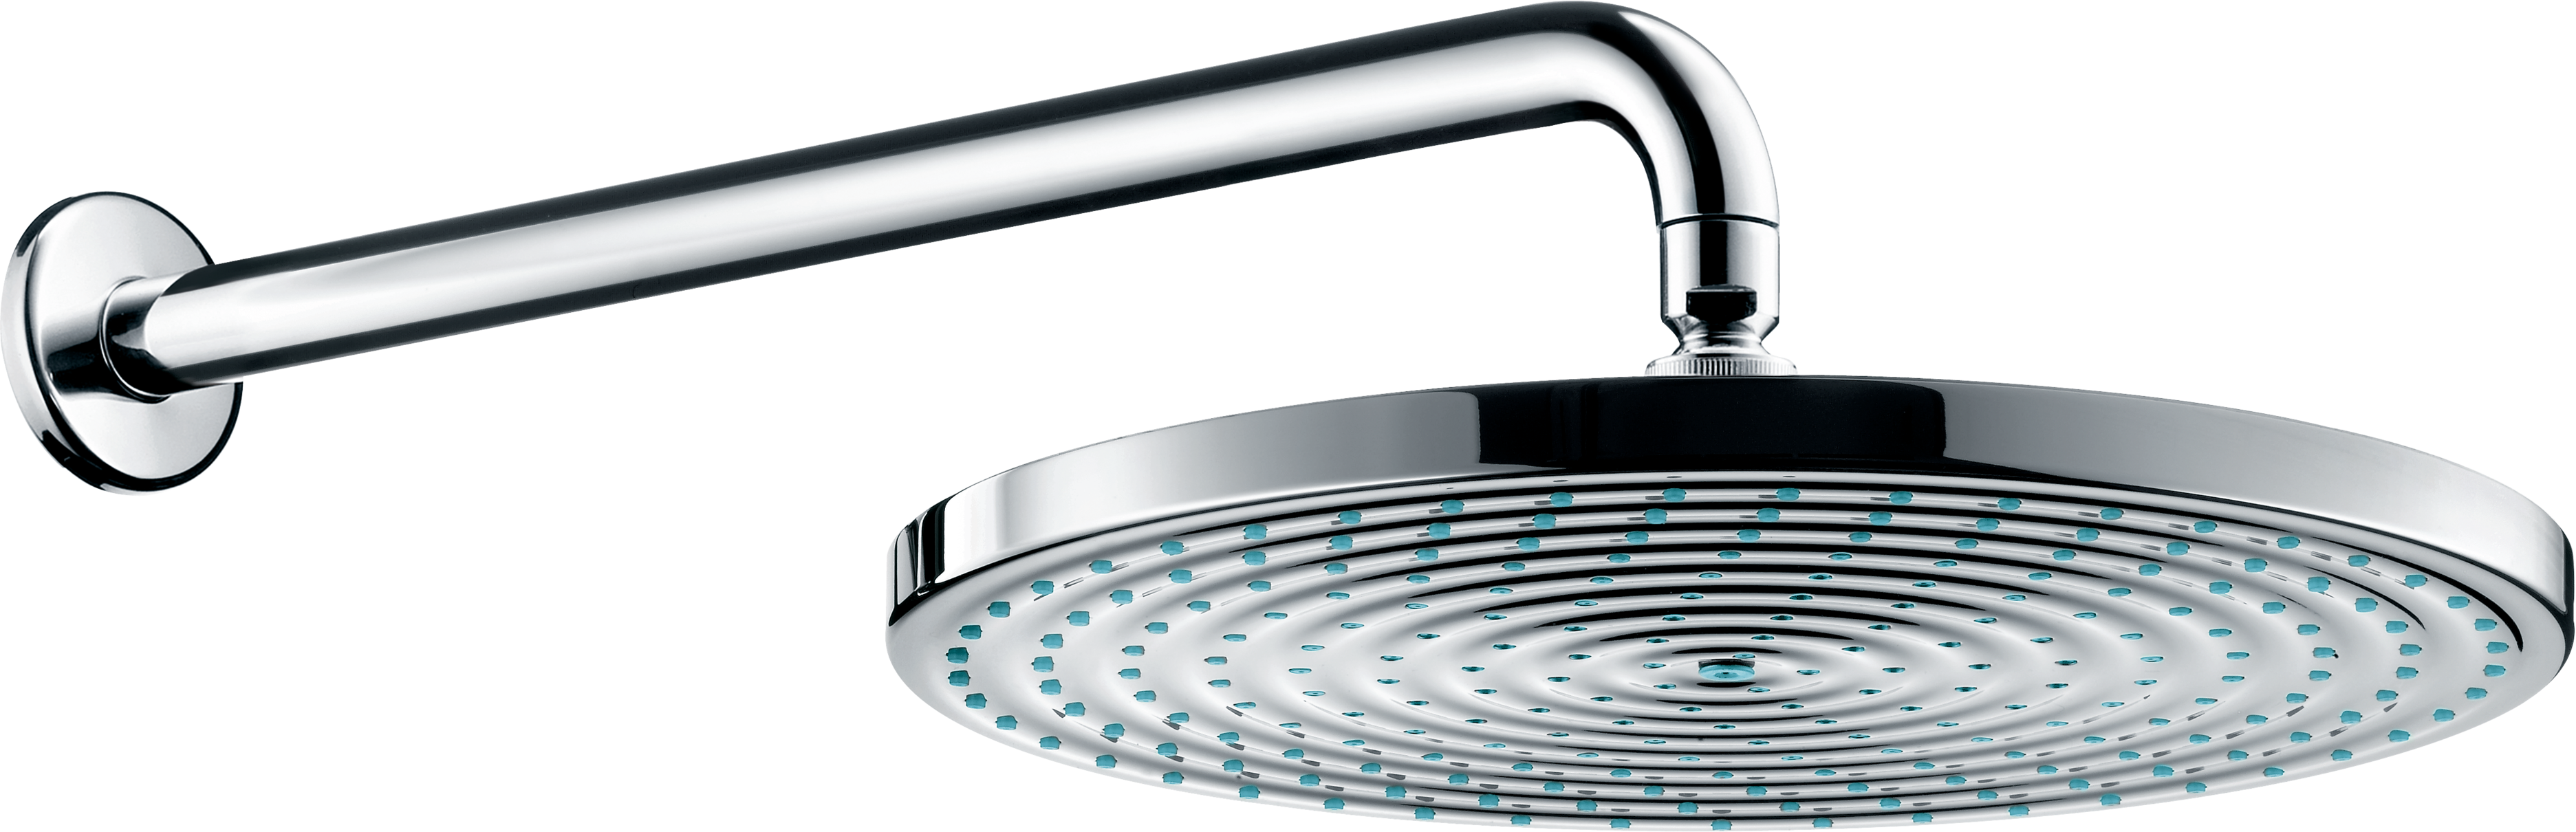 A Shower Head With Blue Drops